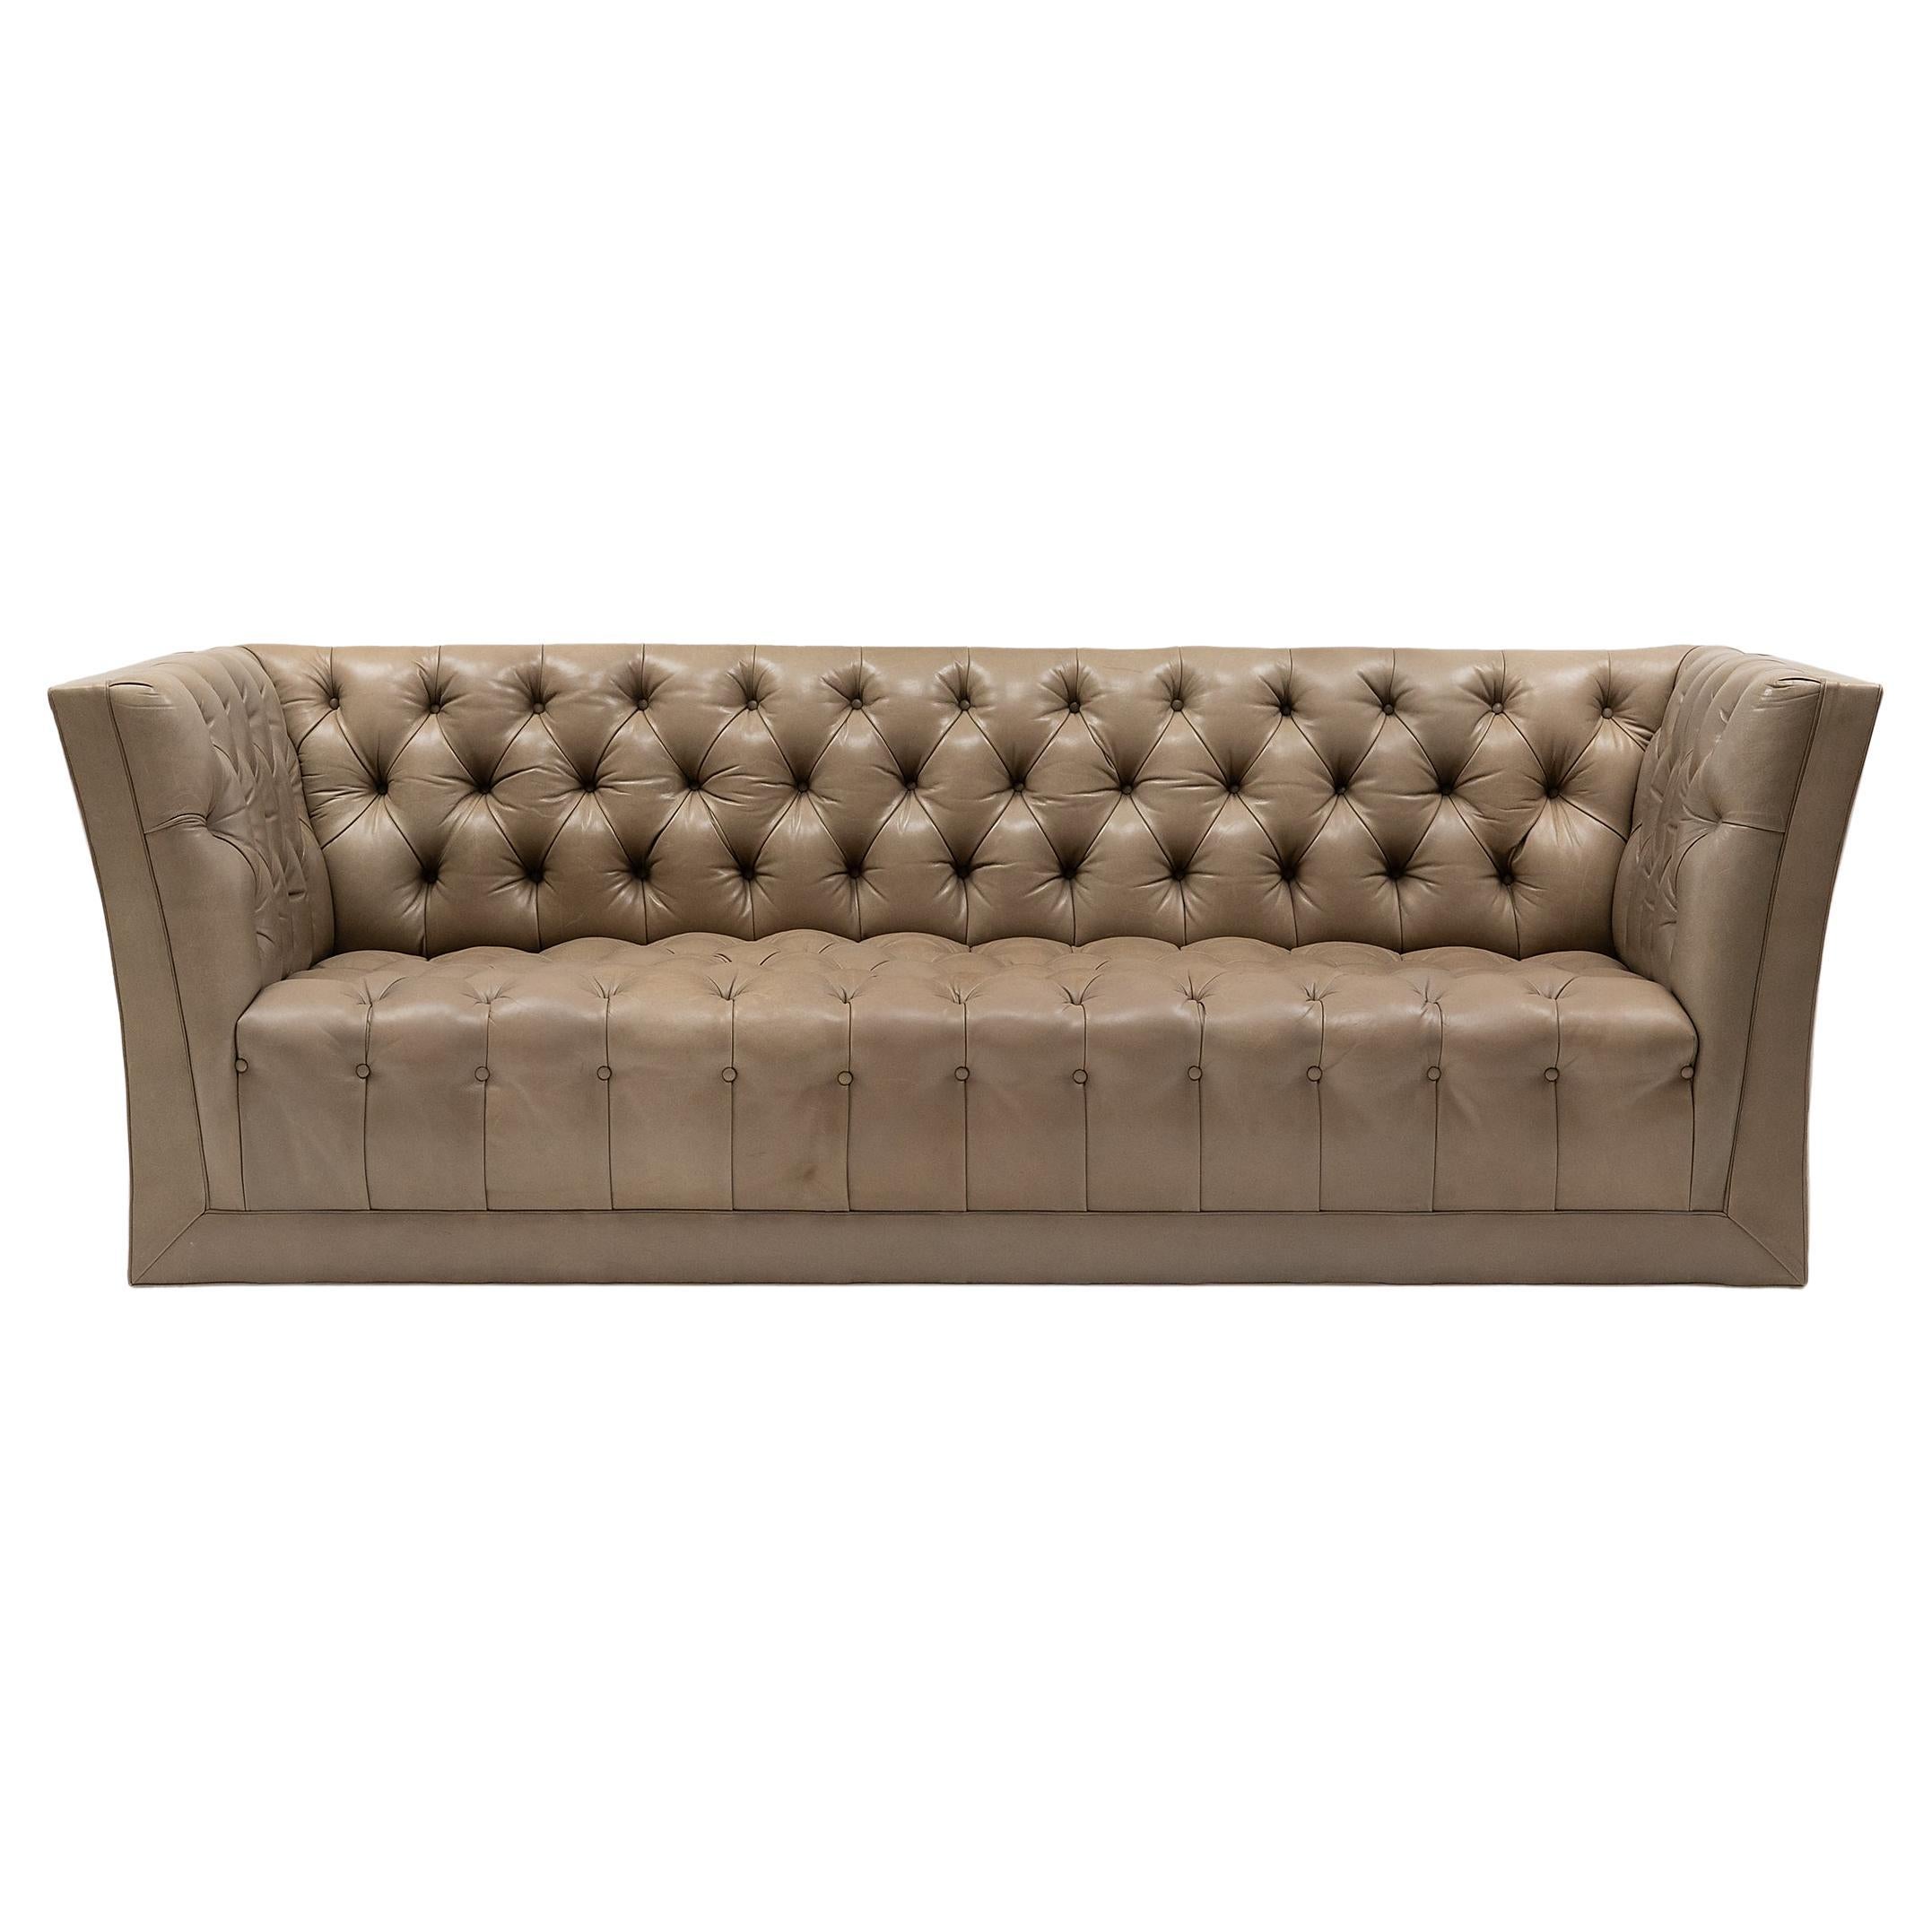 Modern Tufted Leather Sofa For Sale